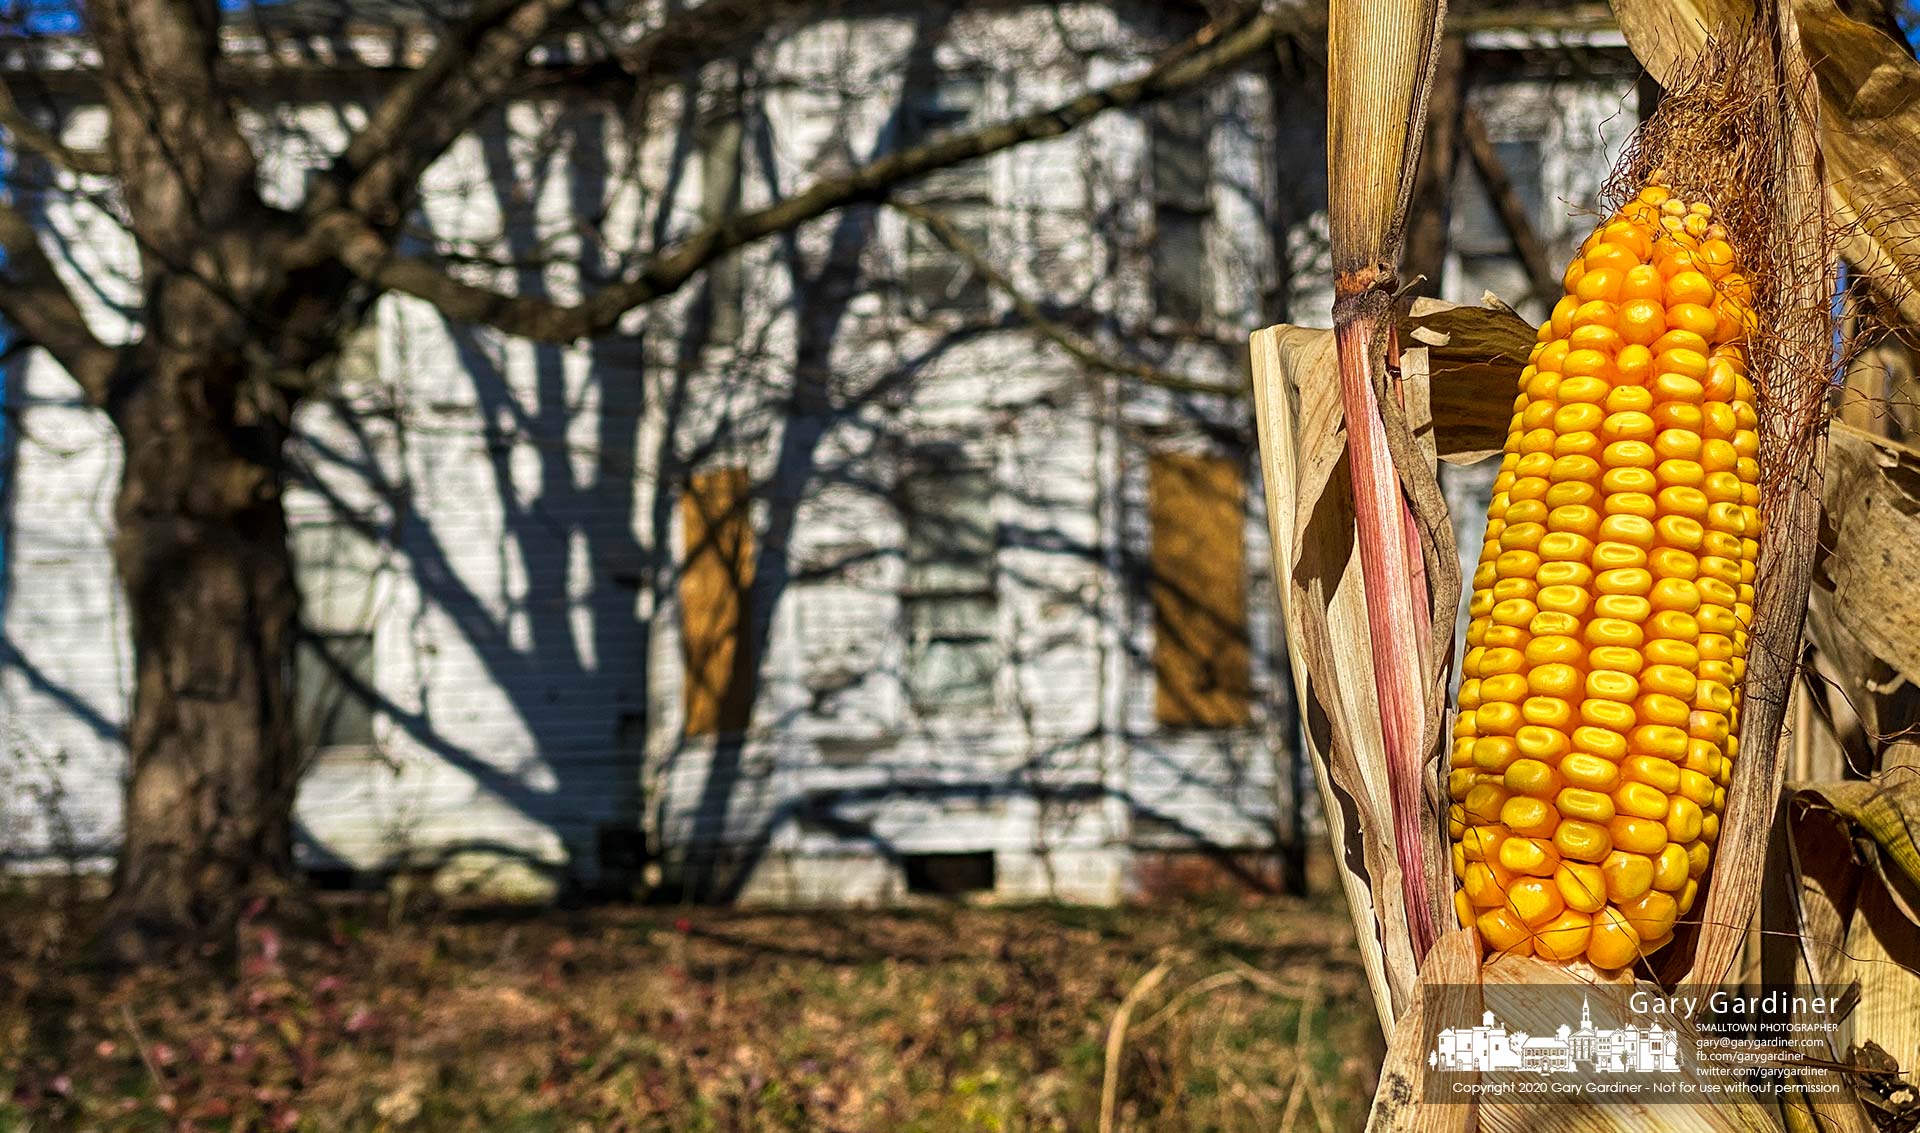 An exposed and ready for harvest ear of corn stands out along the edge of the field beside the old farmhouse on the Braun Farm. My Final Photo for Nov. 16, 2020.